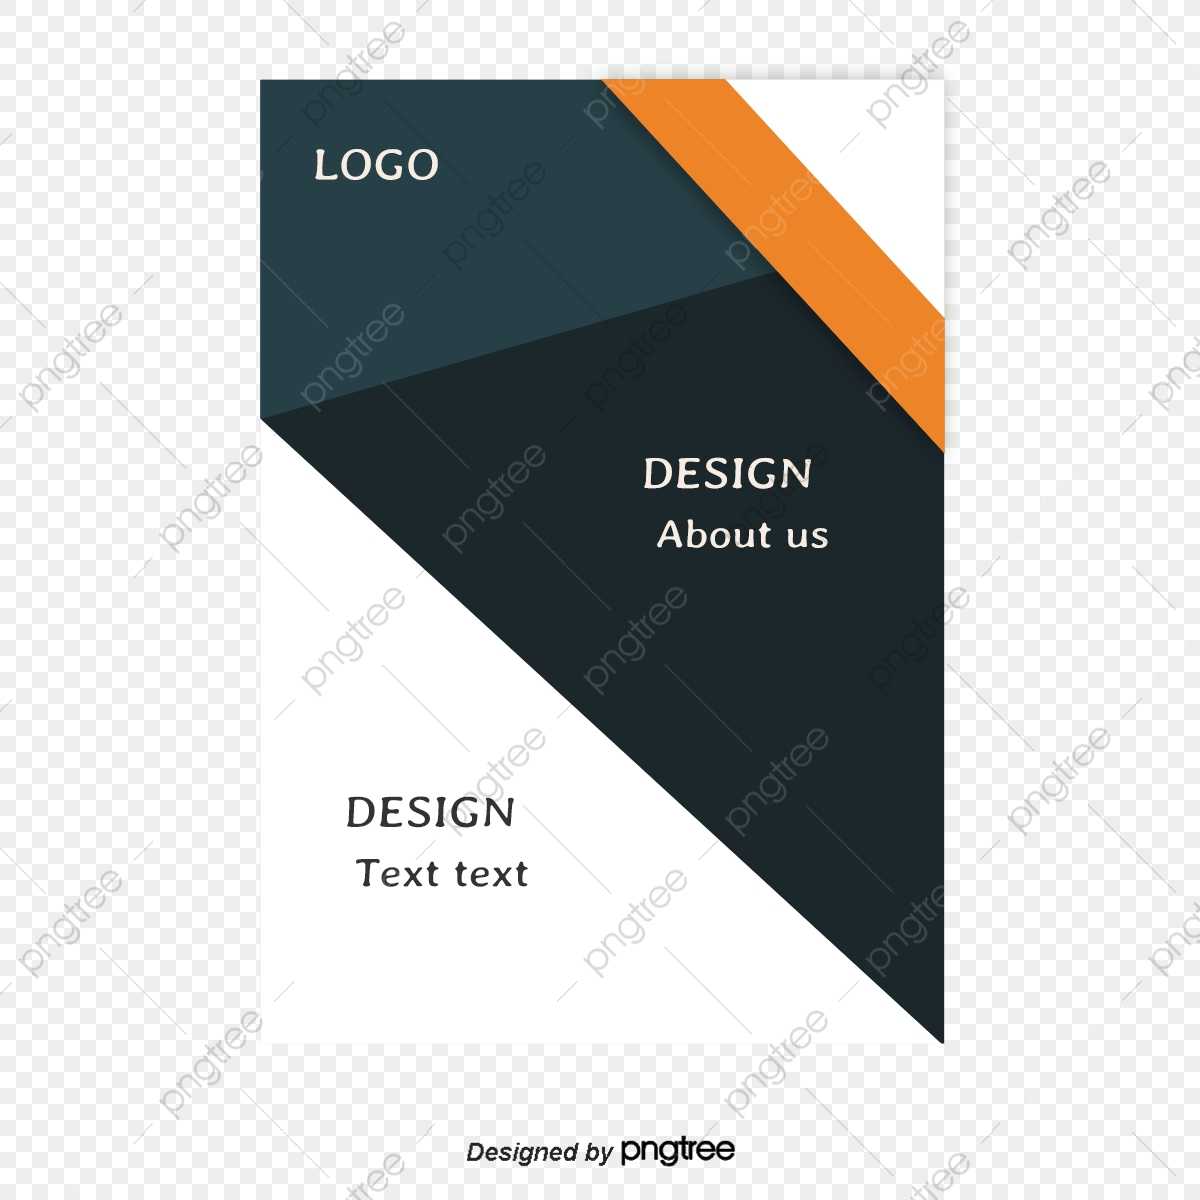 Simple Single Page Brochure Design, Information Chart Pertaining To Single Page Brochure Templates Psd